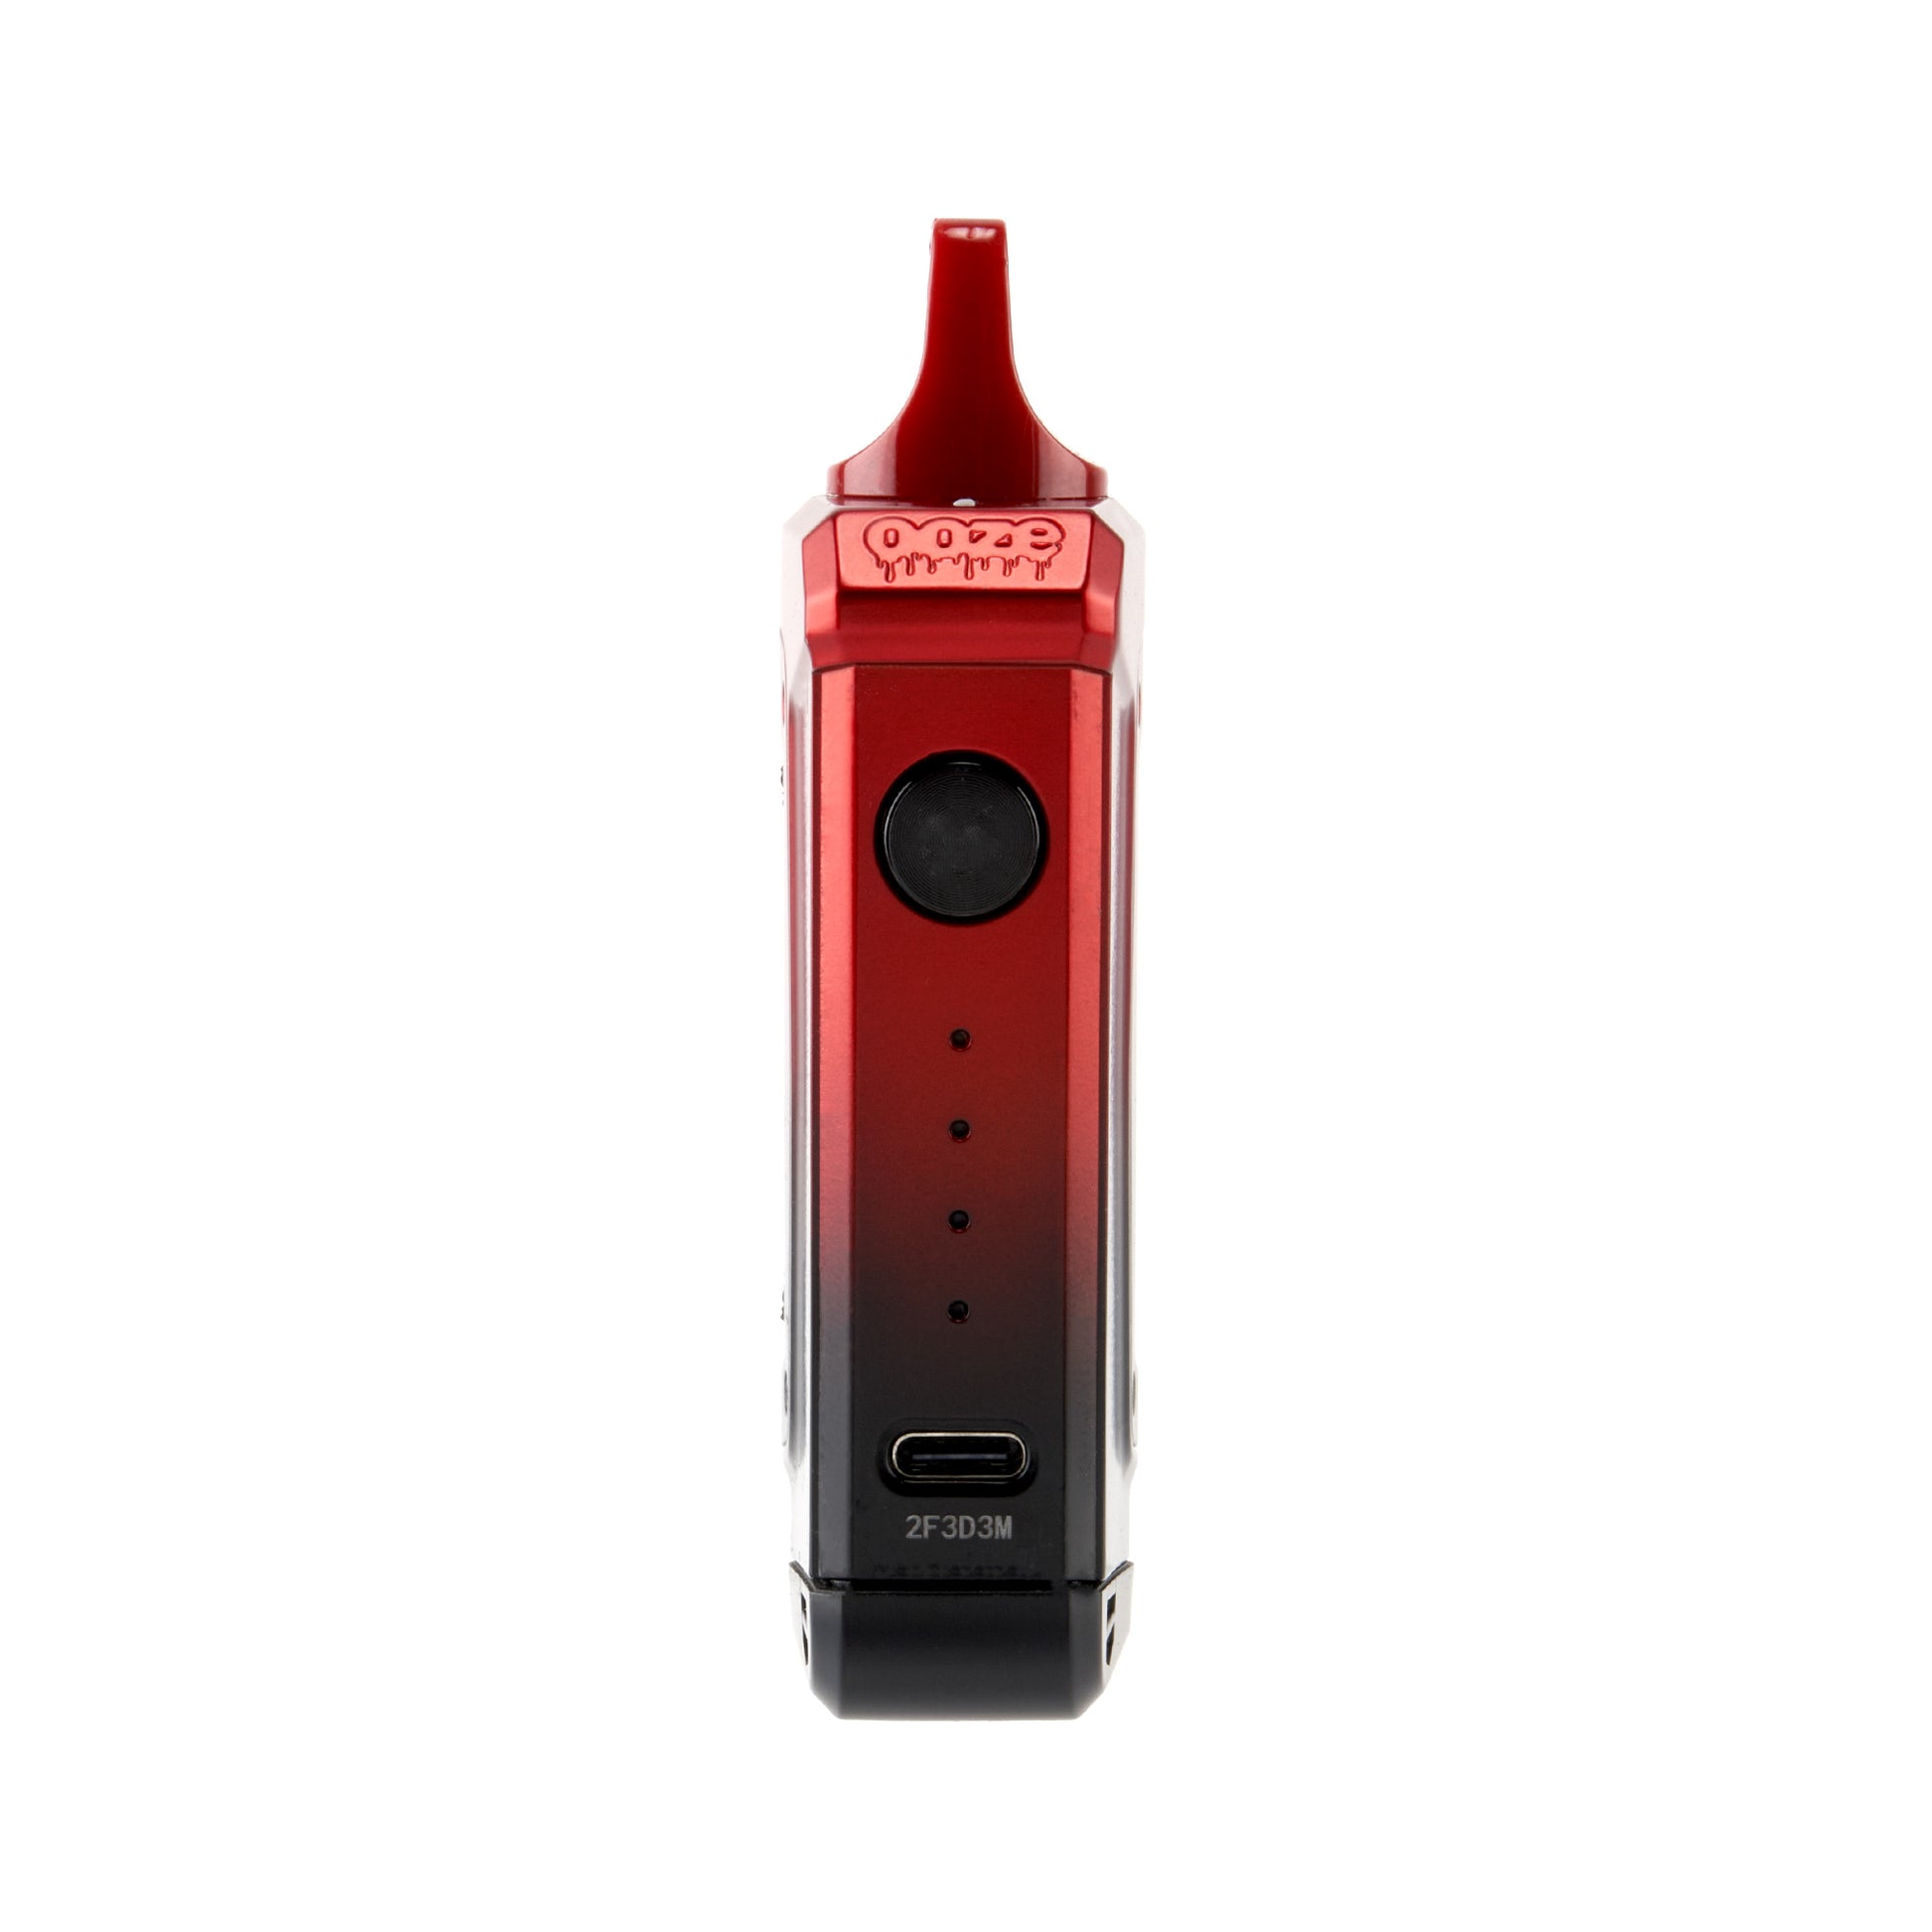 The midnight sun Ooze Duplex 2 extract vaporizer is shown with the magnetic plate removed to show the interface